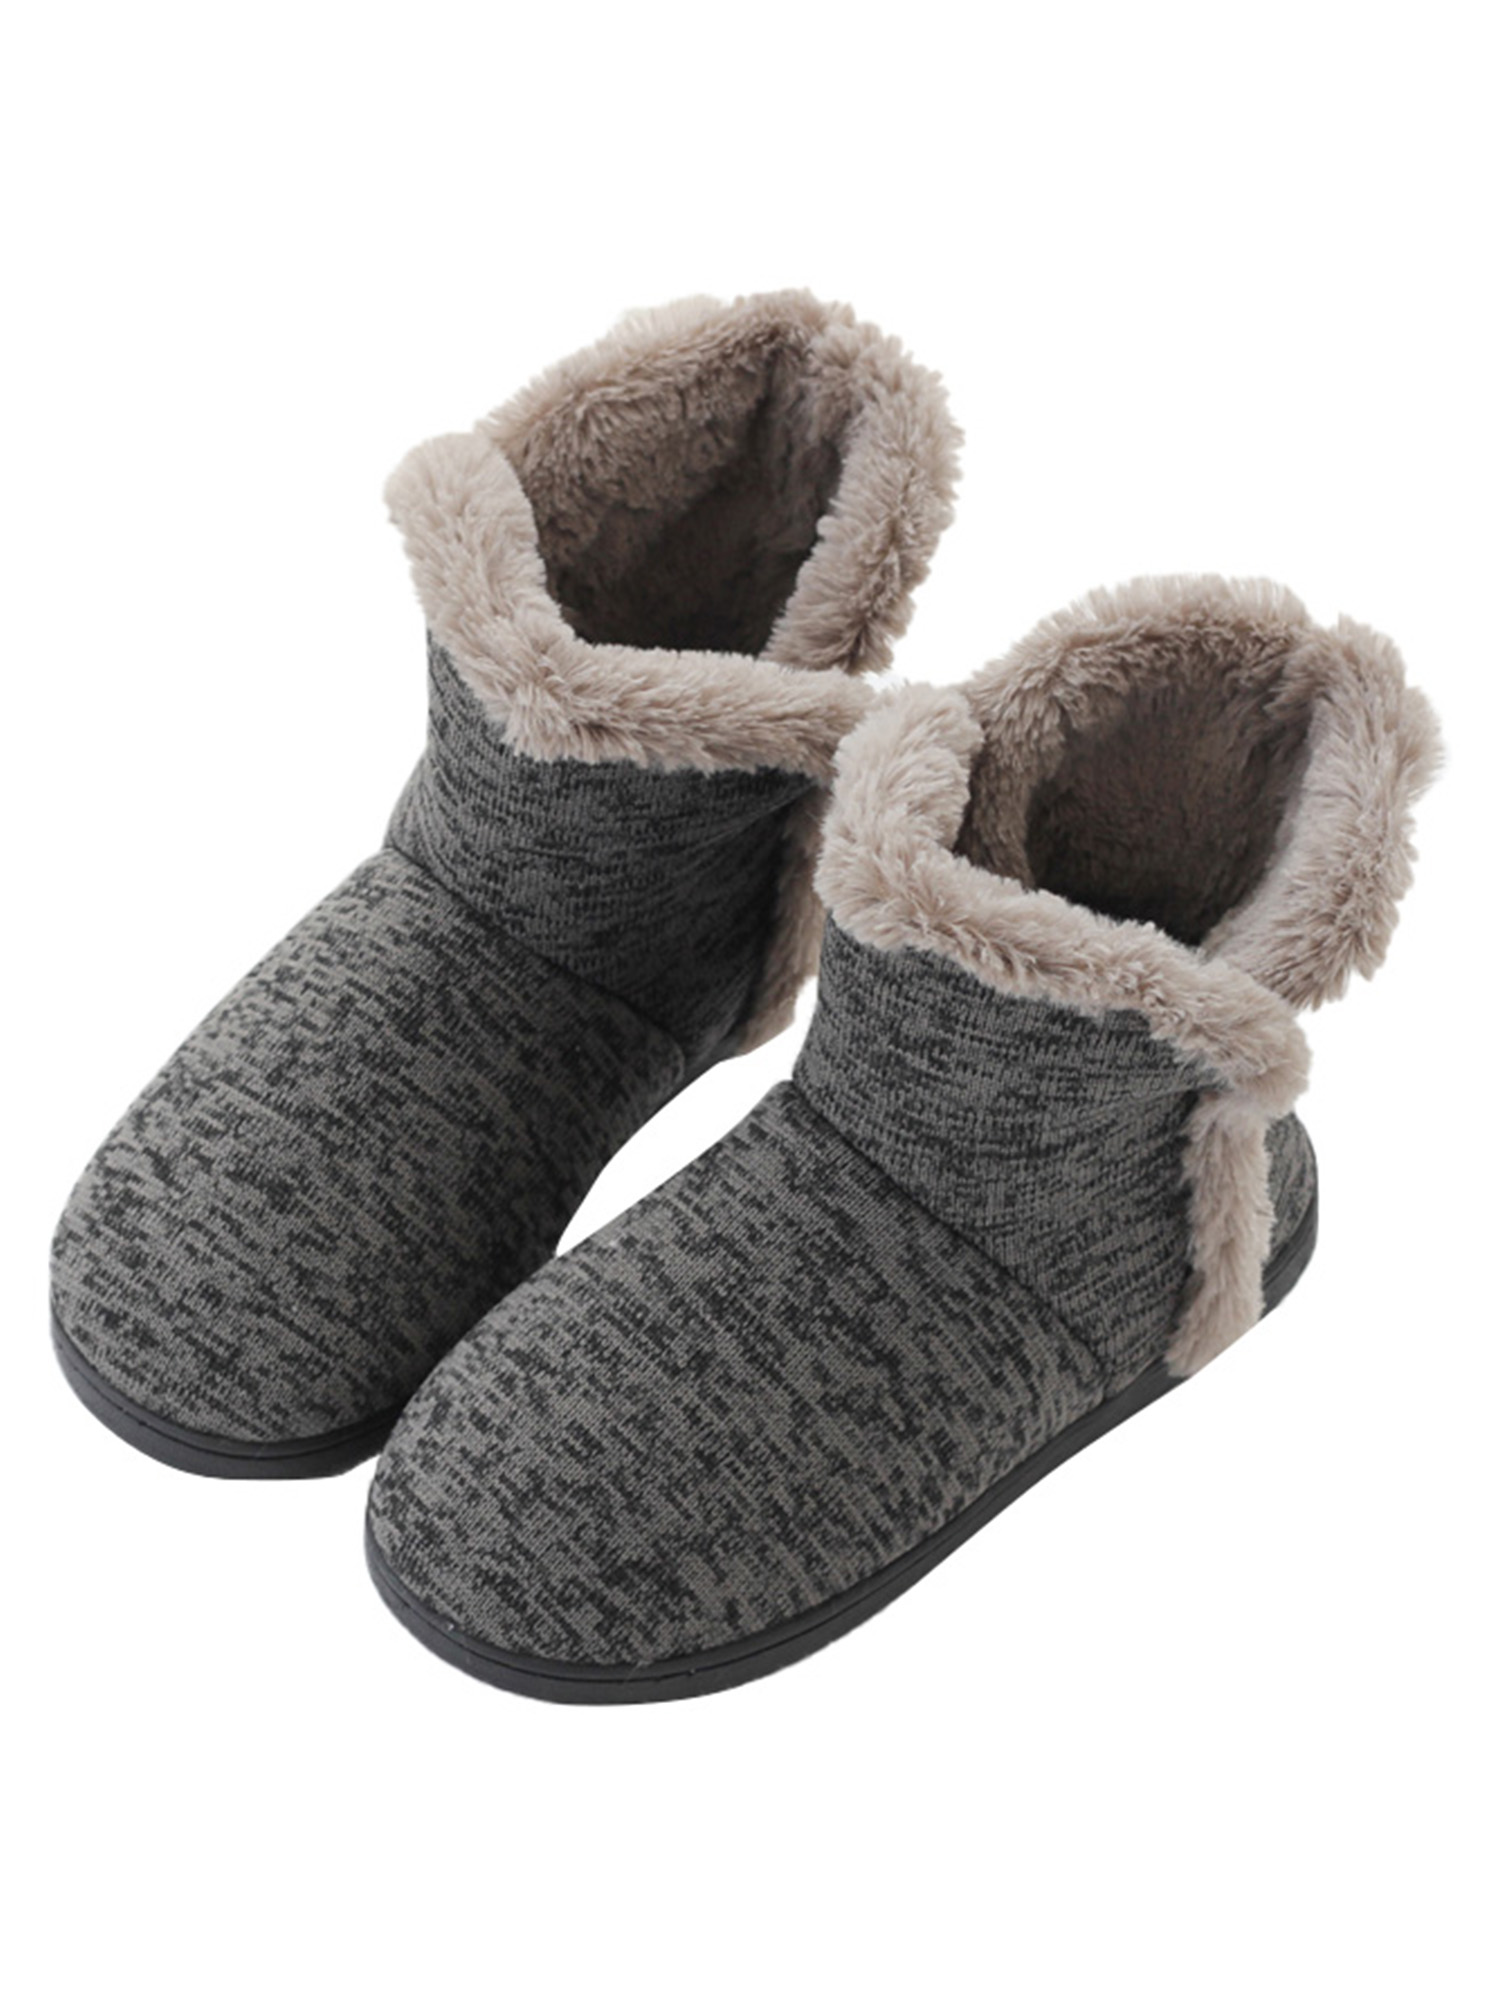 Mens House Shoes Bootie Slippers Winter Boots Plush Slip On Gray WAV4 - image 4 of 4